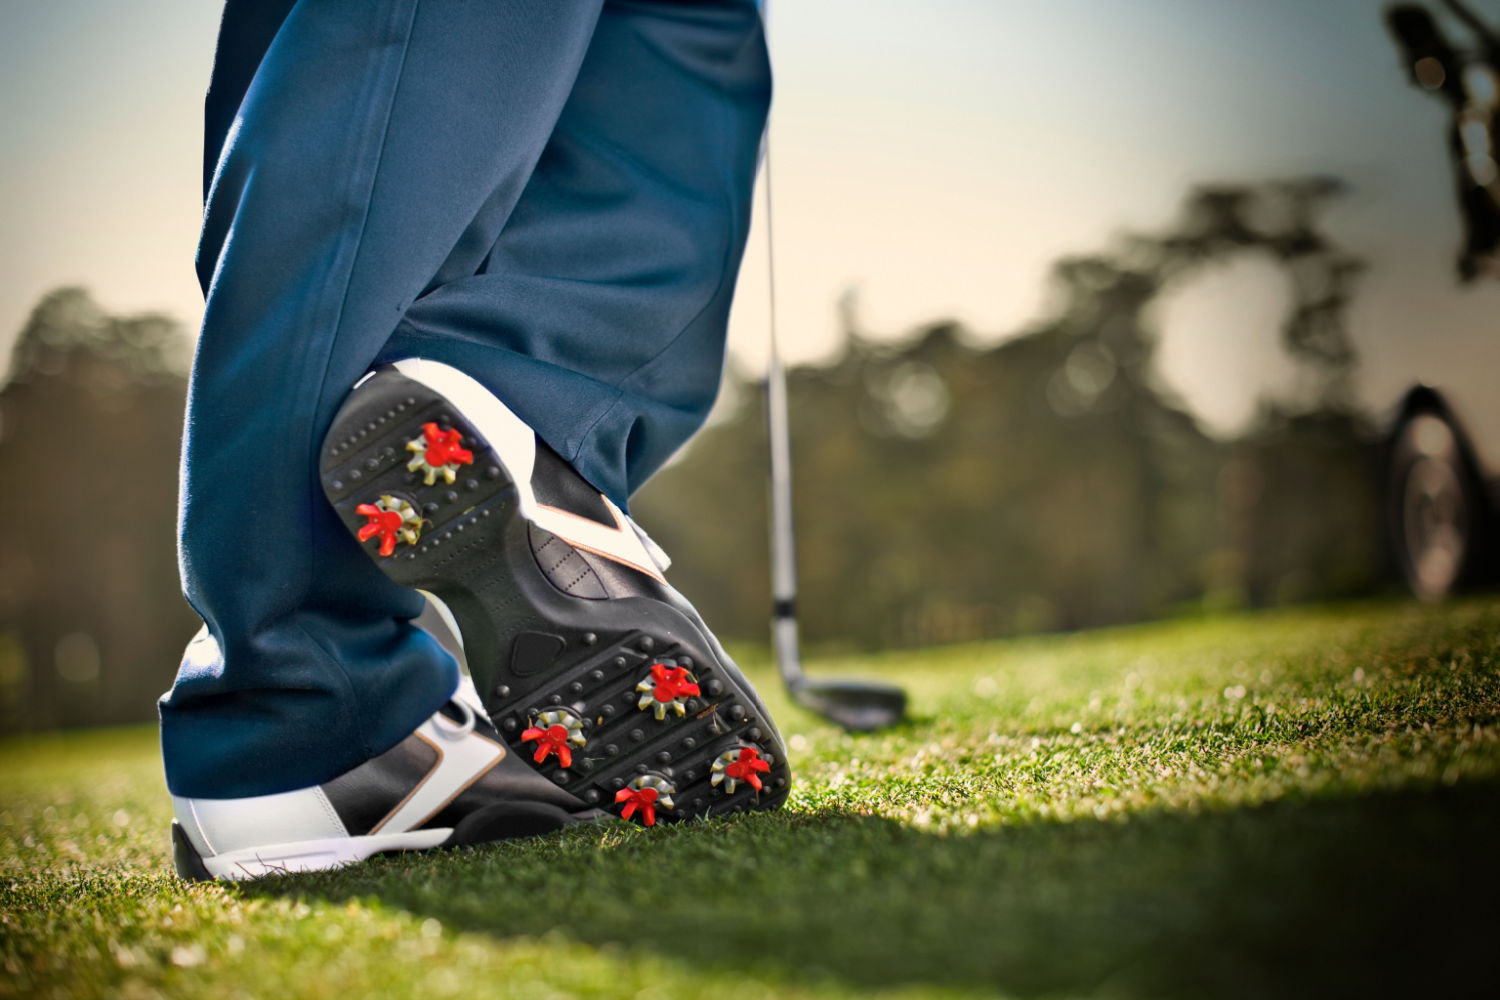 spiked golf shoes